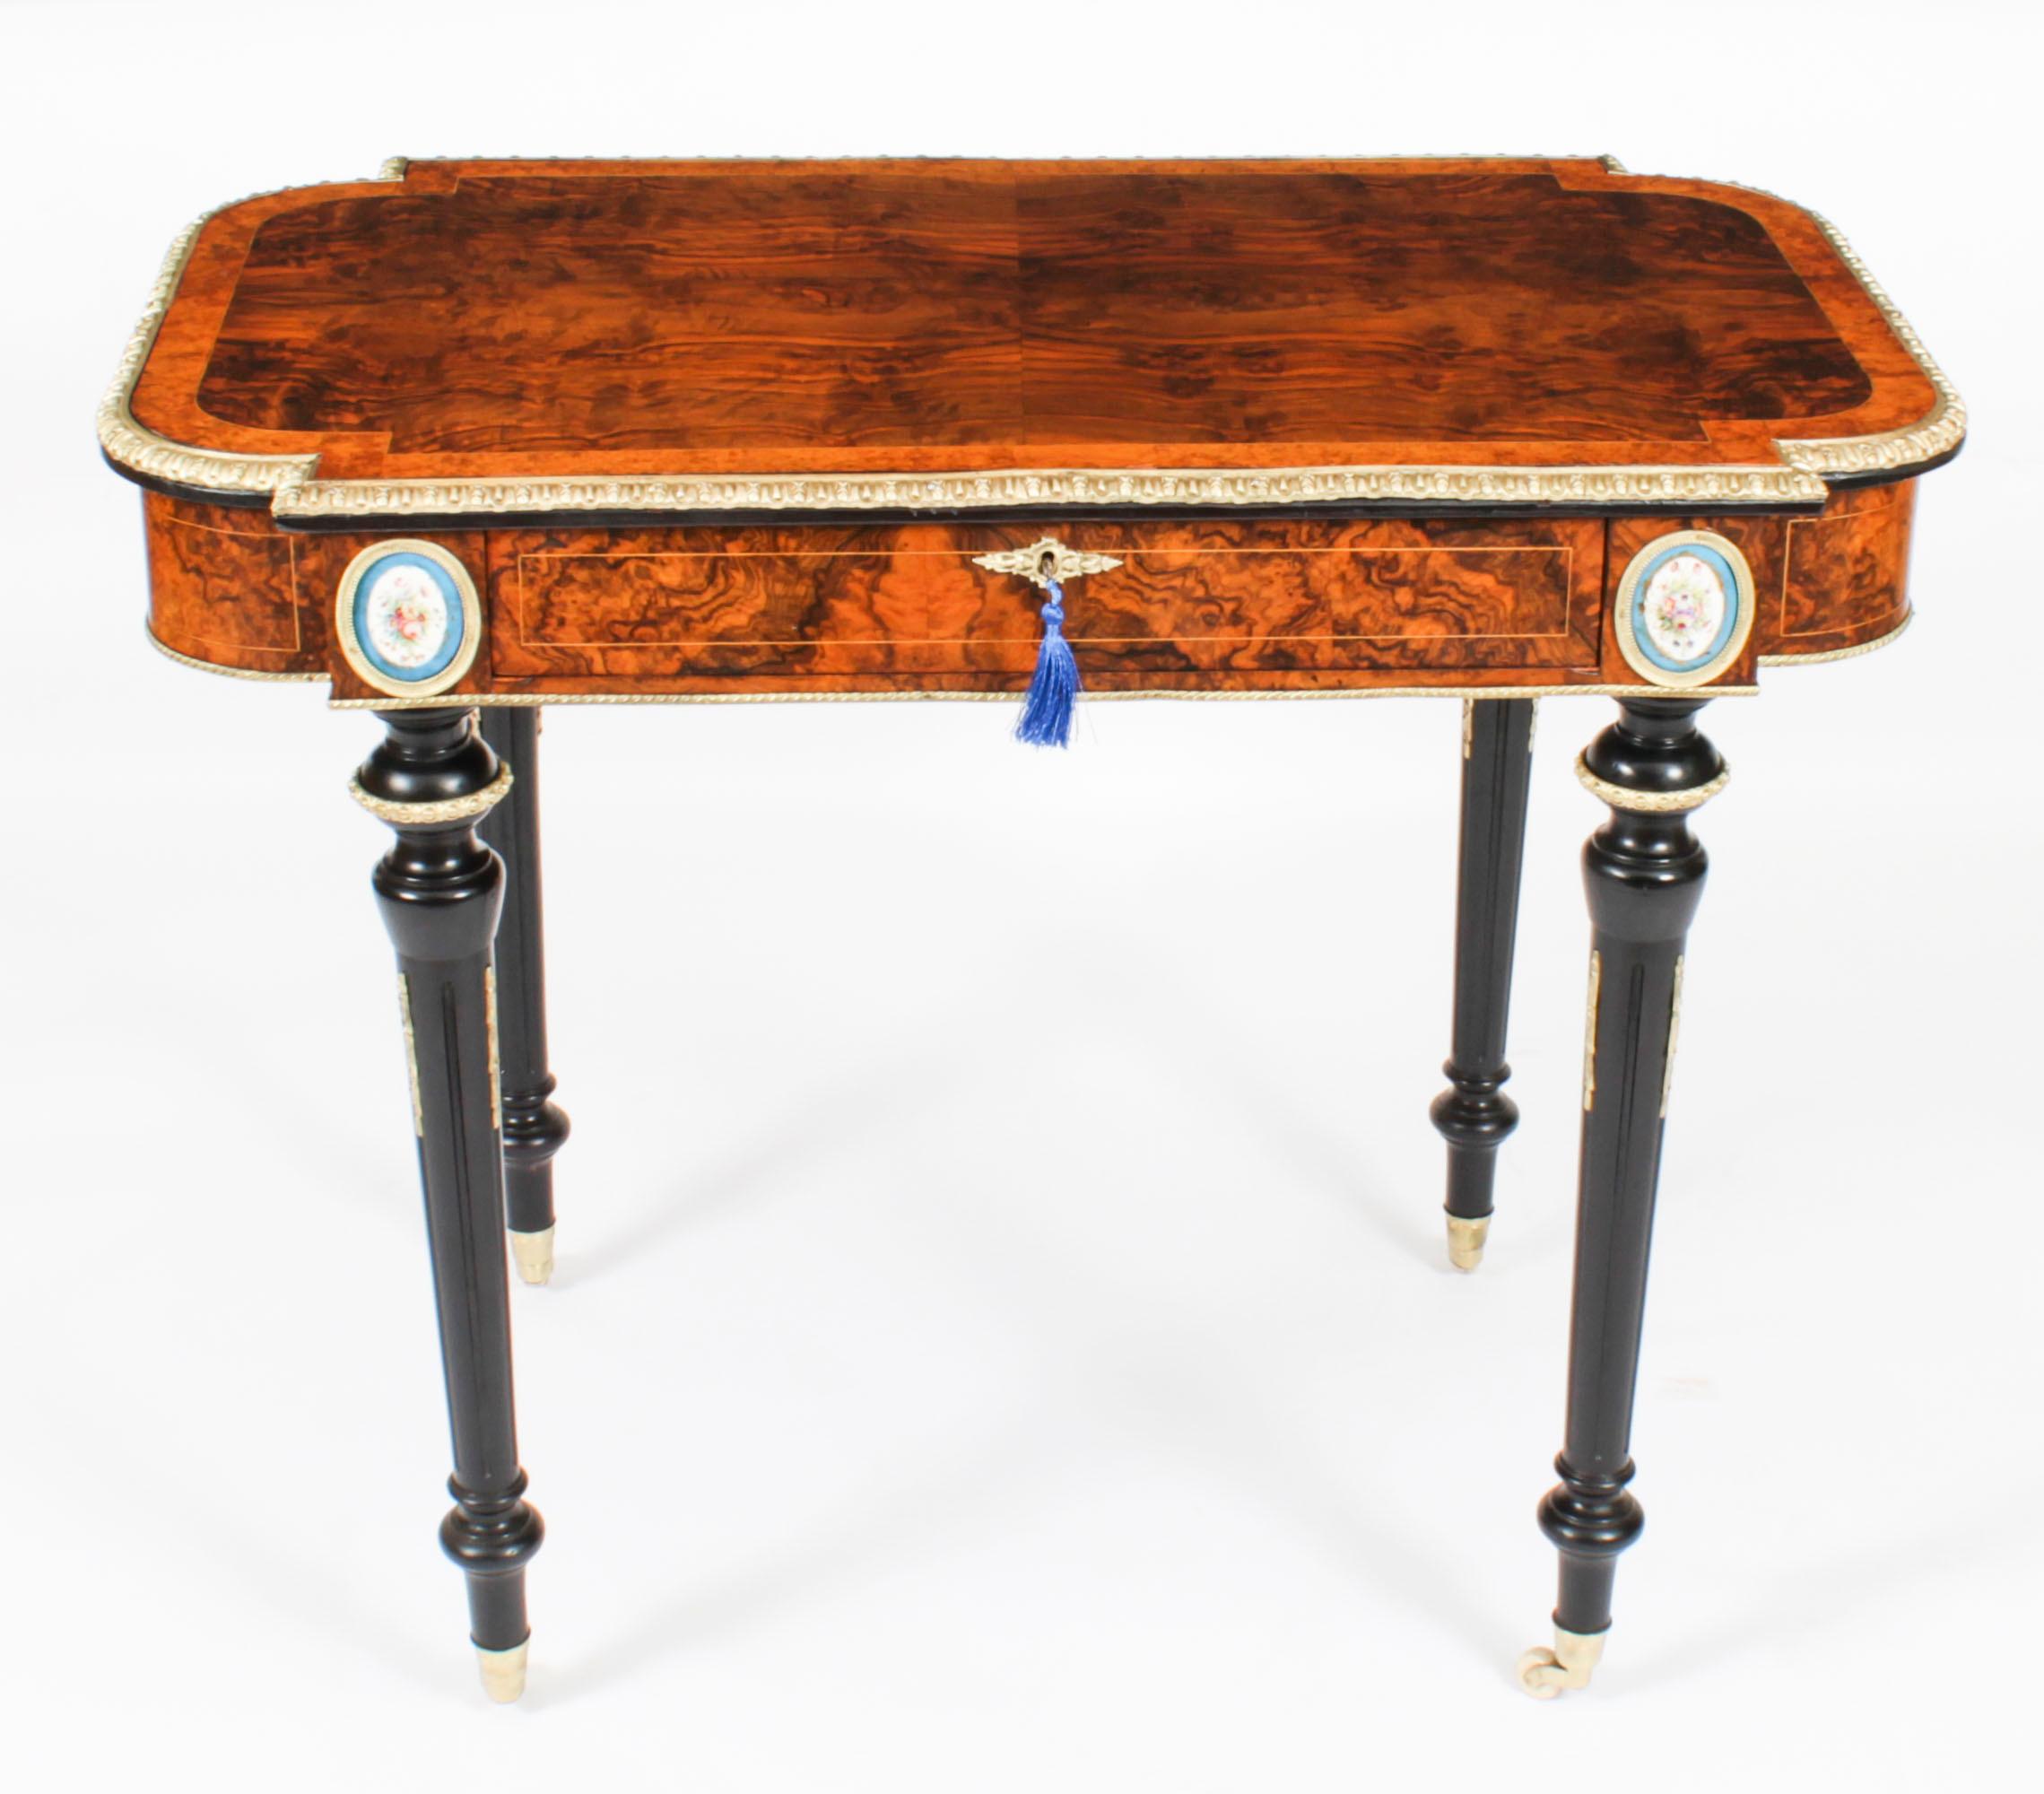 This is an elegant antique French ormolu mounted burr walnut writing table, Circa 1870 in date.
 
This lovely shaped top is crafted from the most beautiful burr walnut, with amboyna crossbanded decoration and boxwood stringing, and featuring a